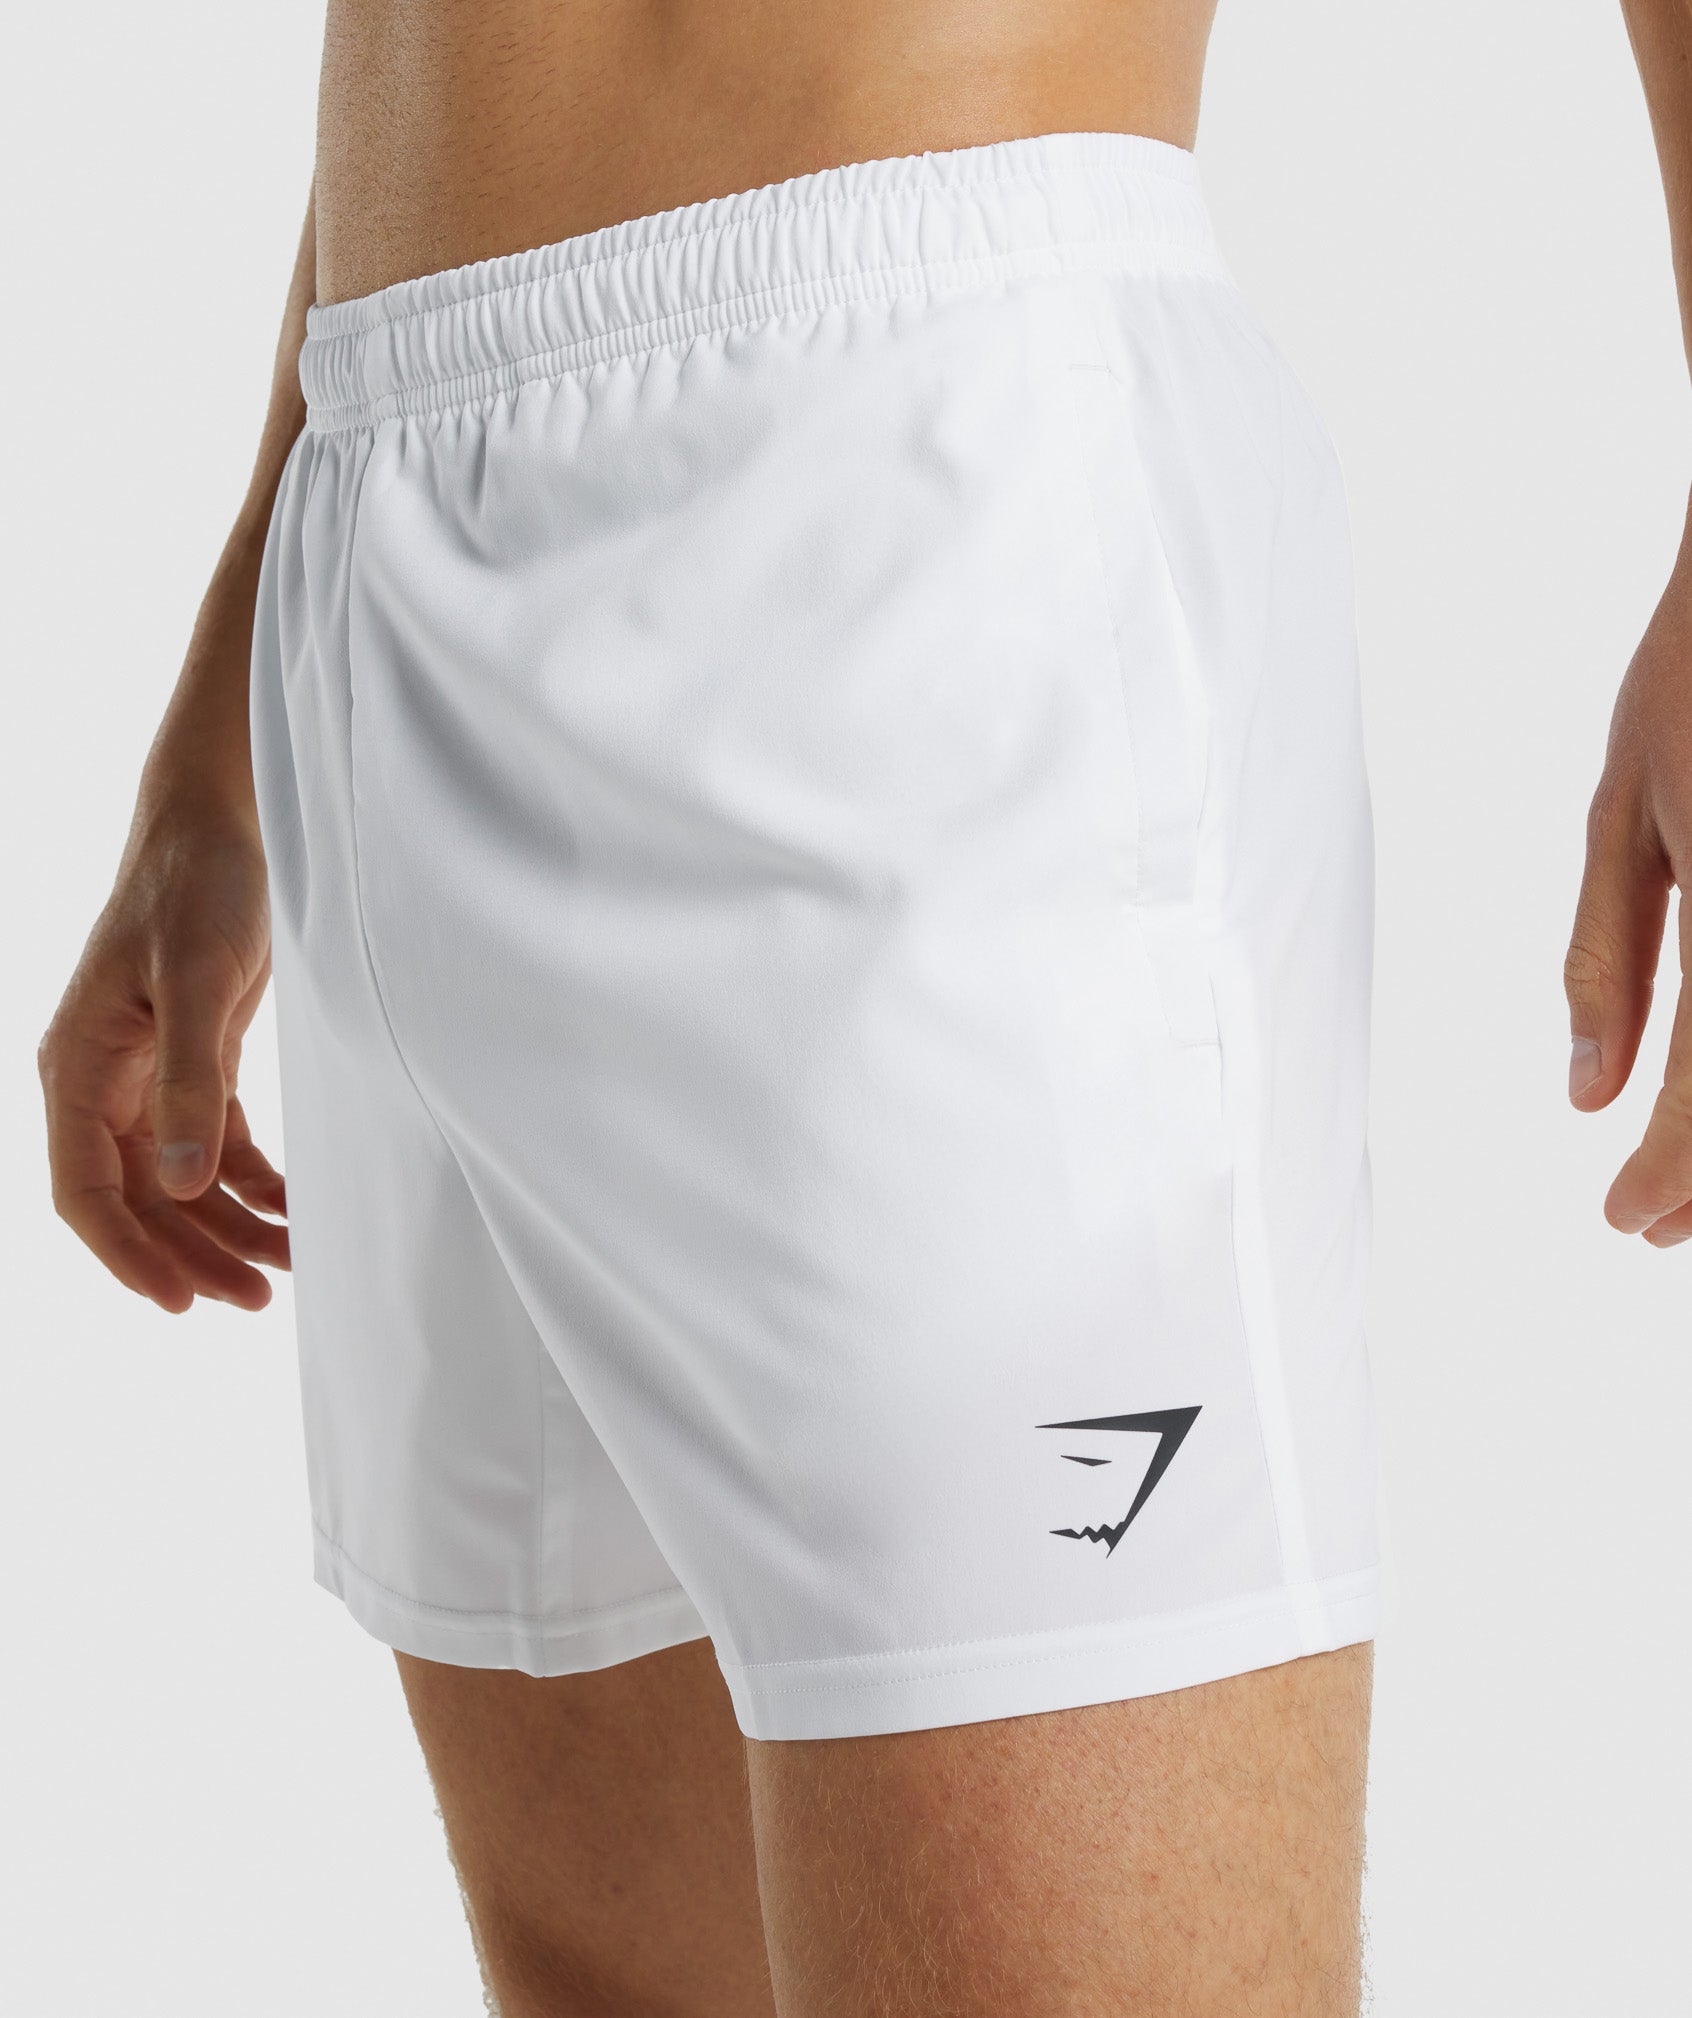 Arrival 5" Shorts in White - view 5